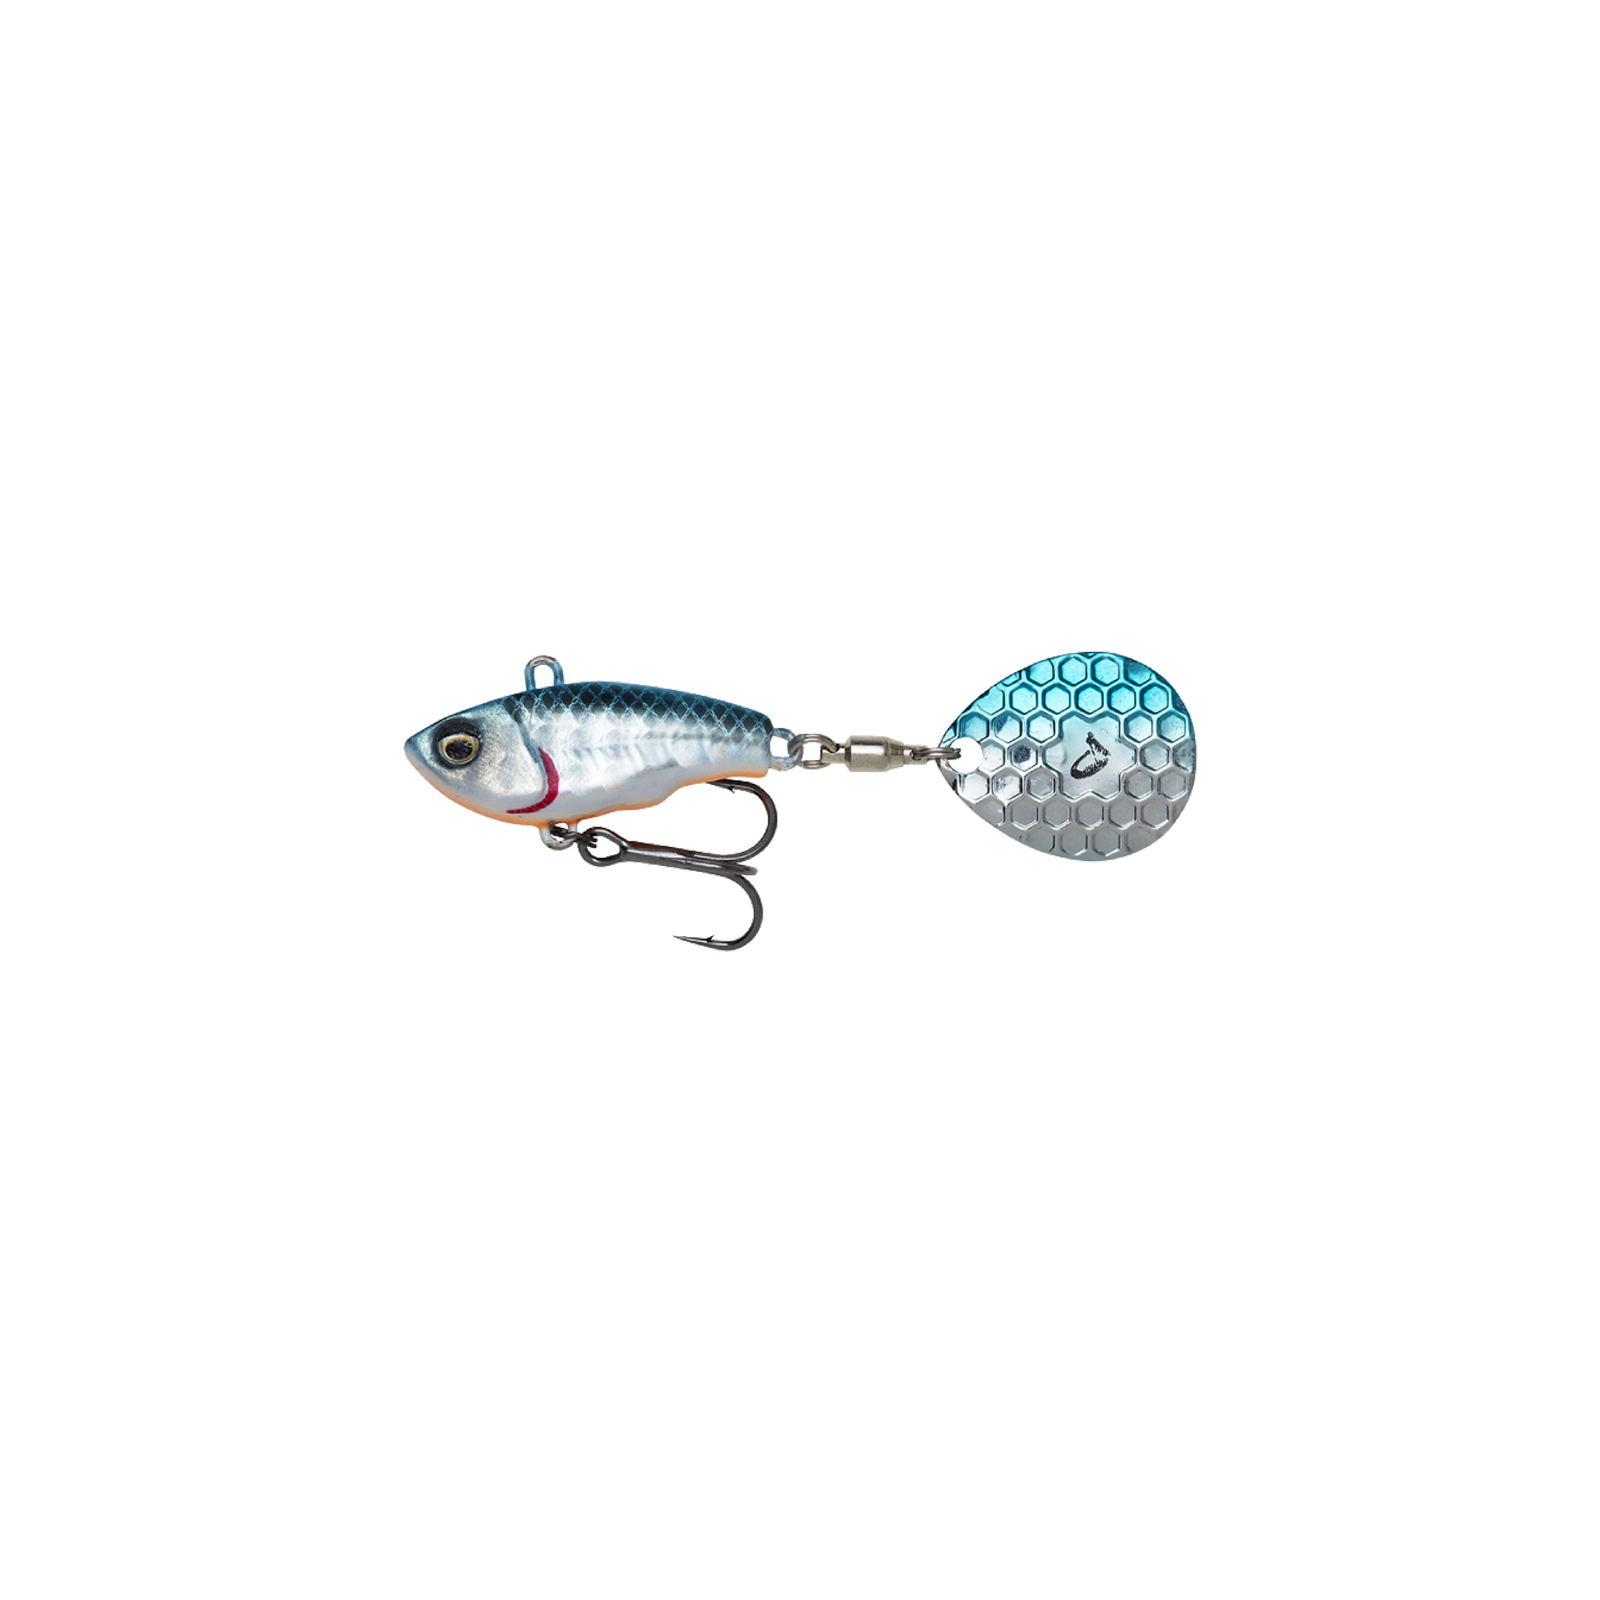 Блесна Savage Gear Fat Tail Spin 80mm 24.0g Blue Silver (1854.44.12)